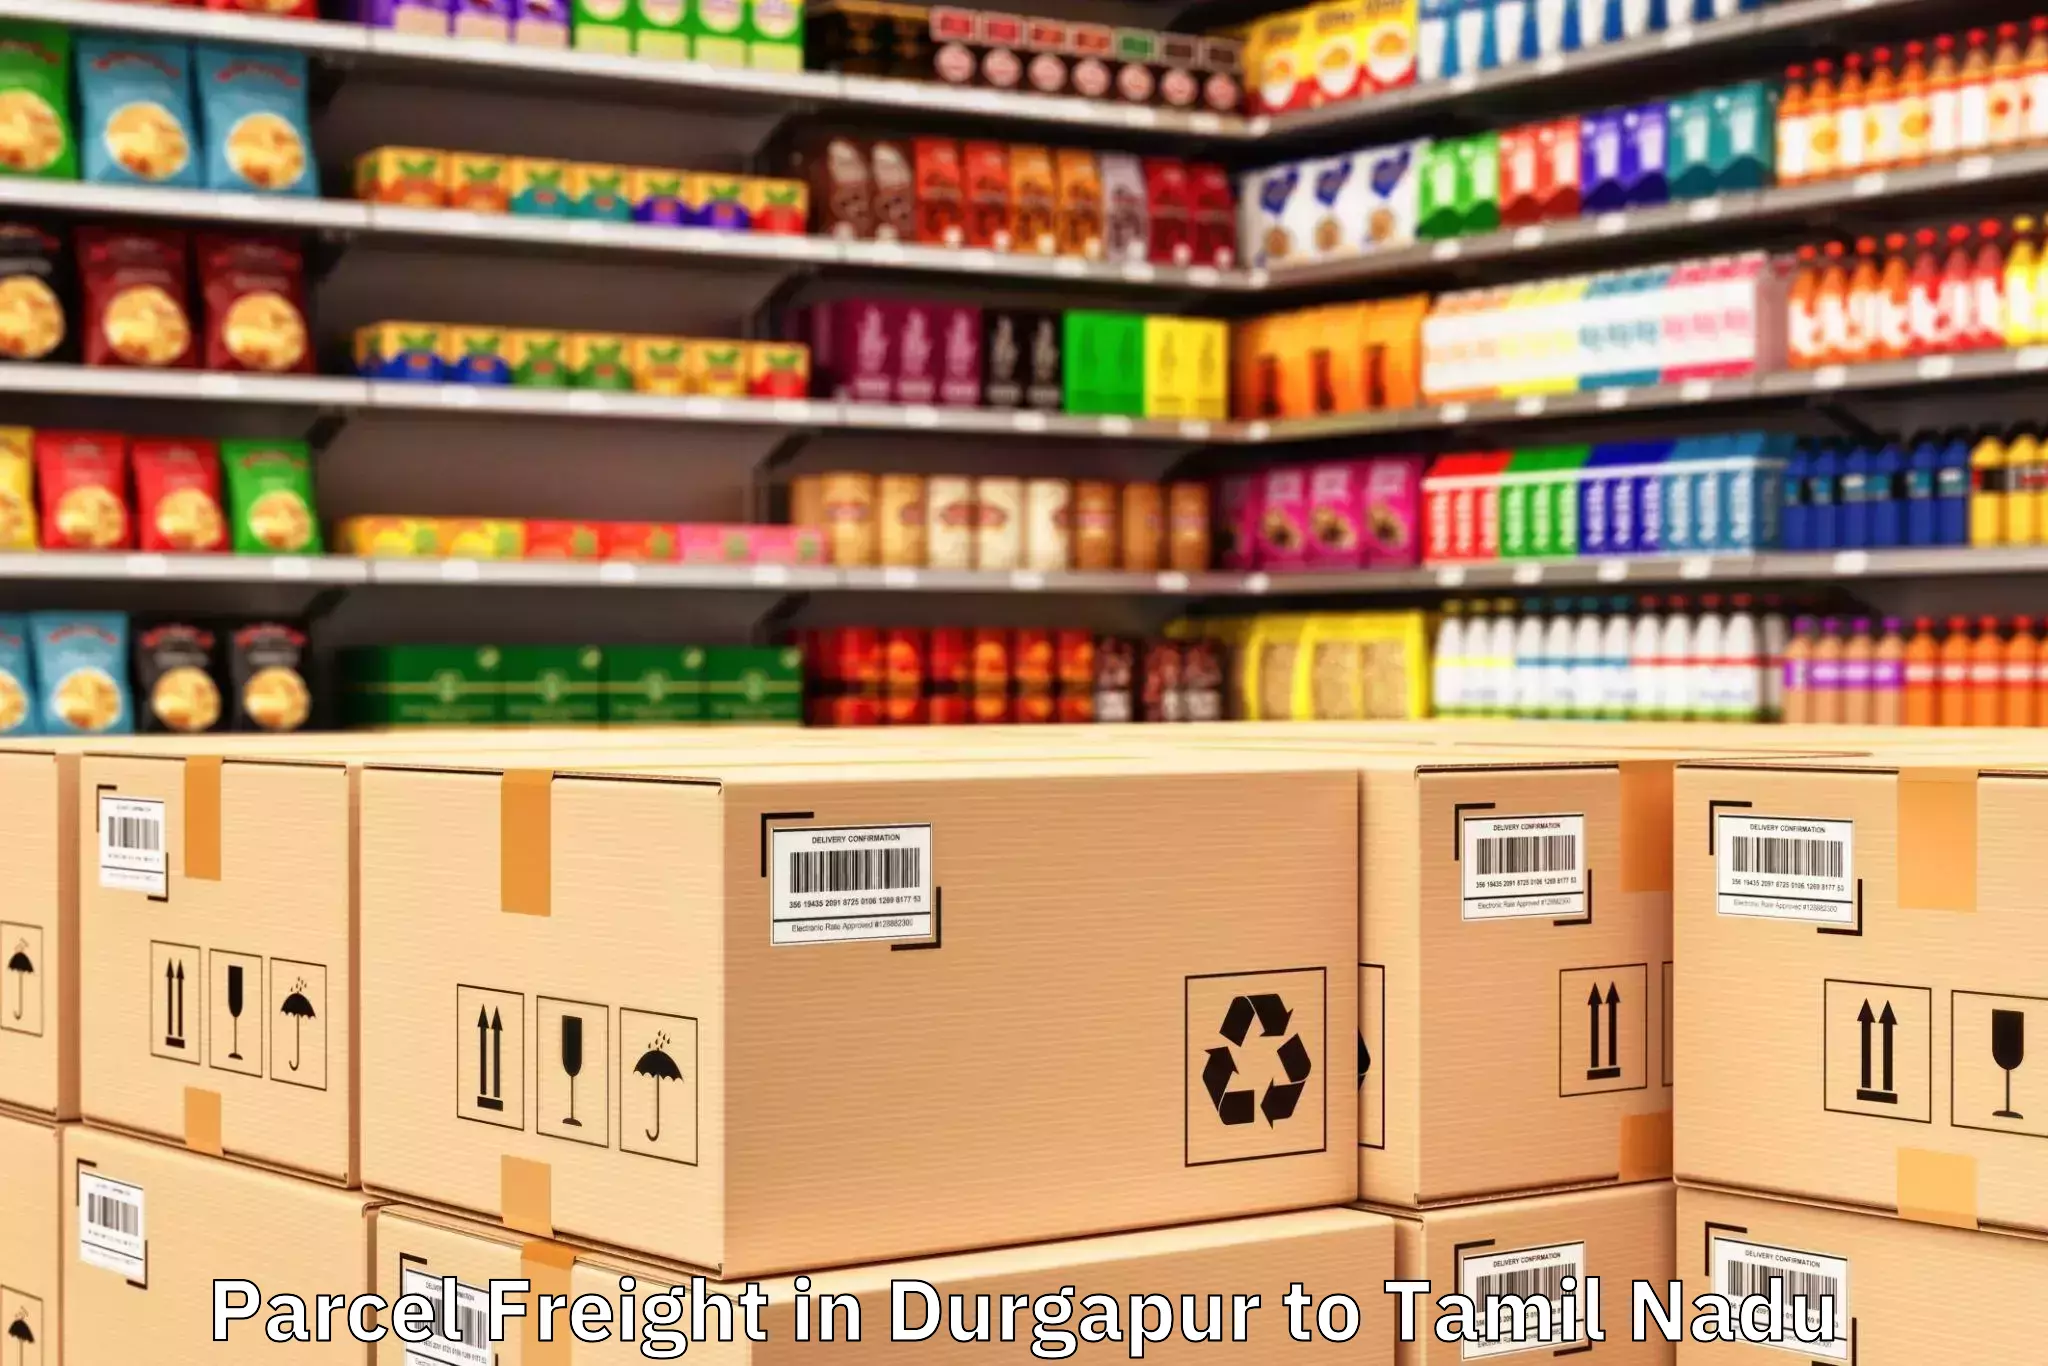 Get Durgapur to Thiruthani Parcel Freight